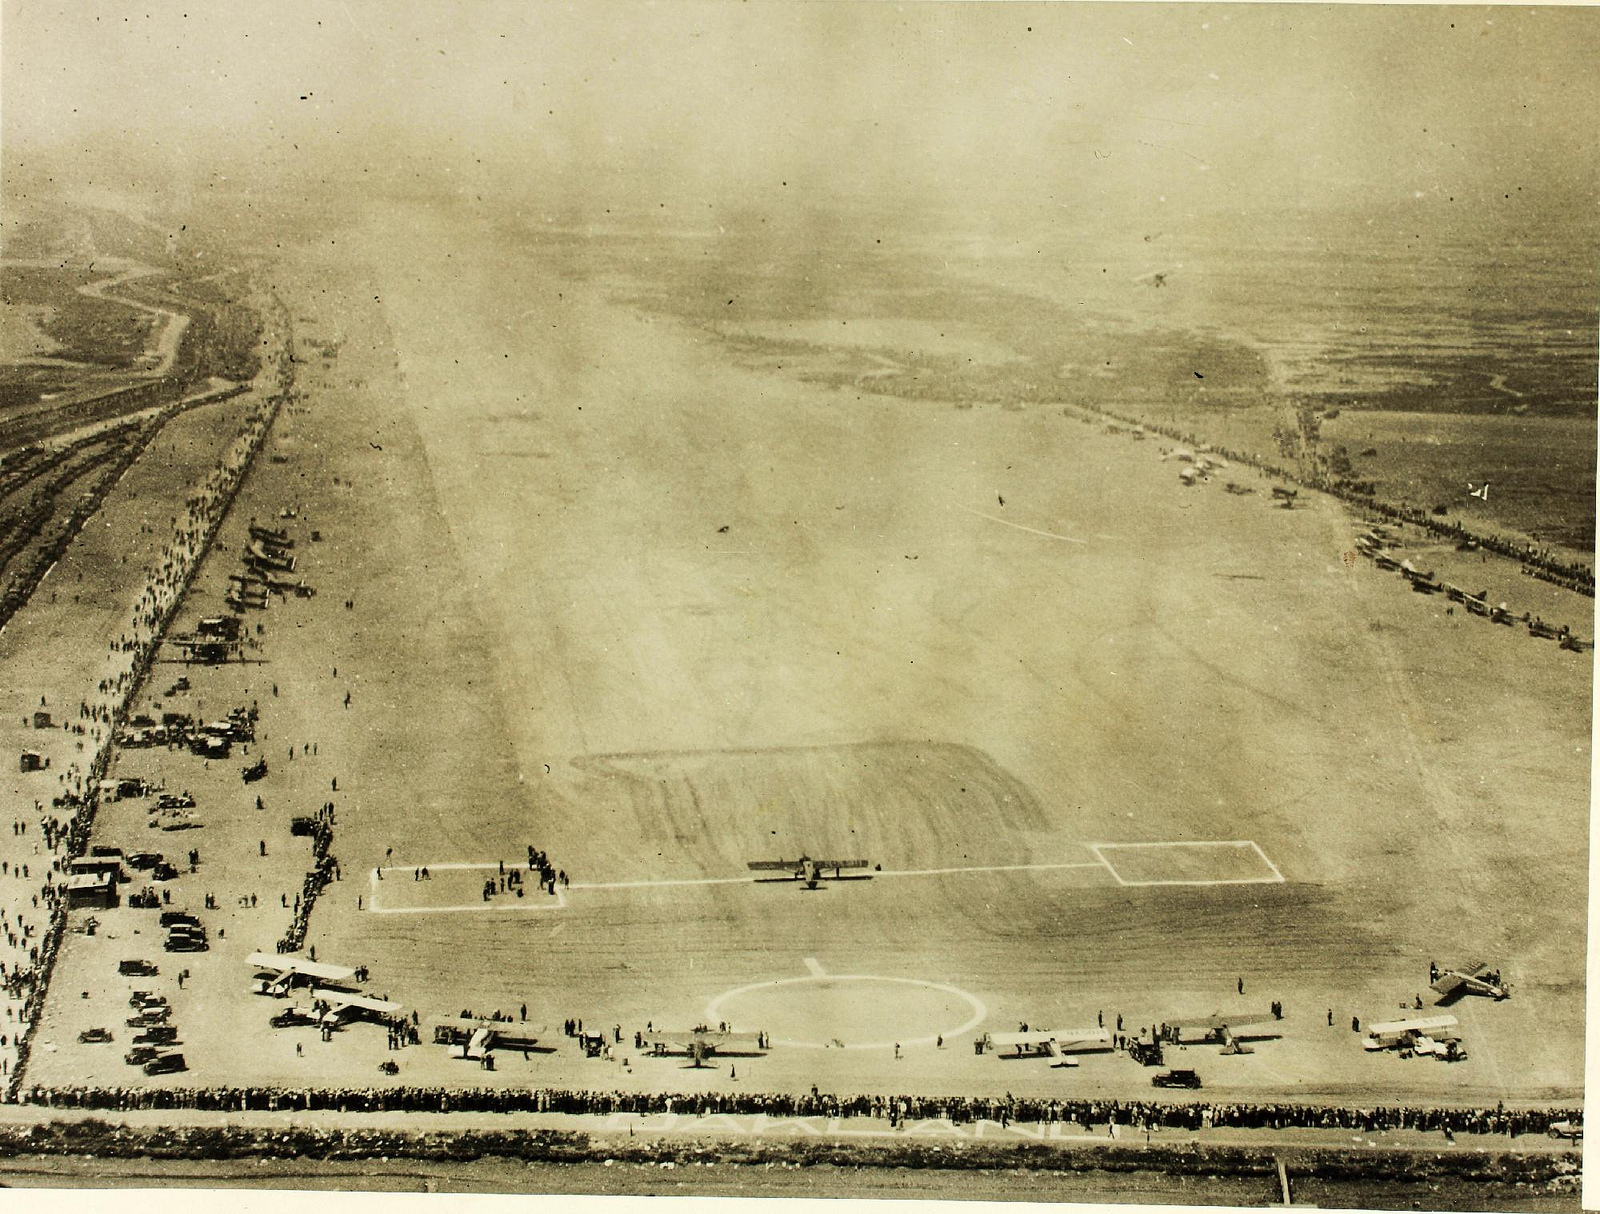 The start of the Dole Air Race, 16 August 1927. (San Diego Air and Space Museum Archives)